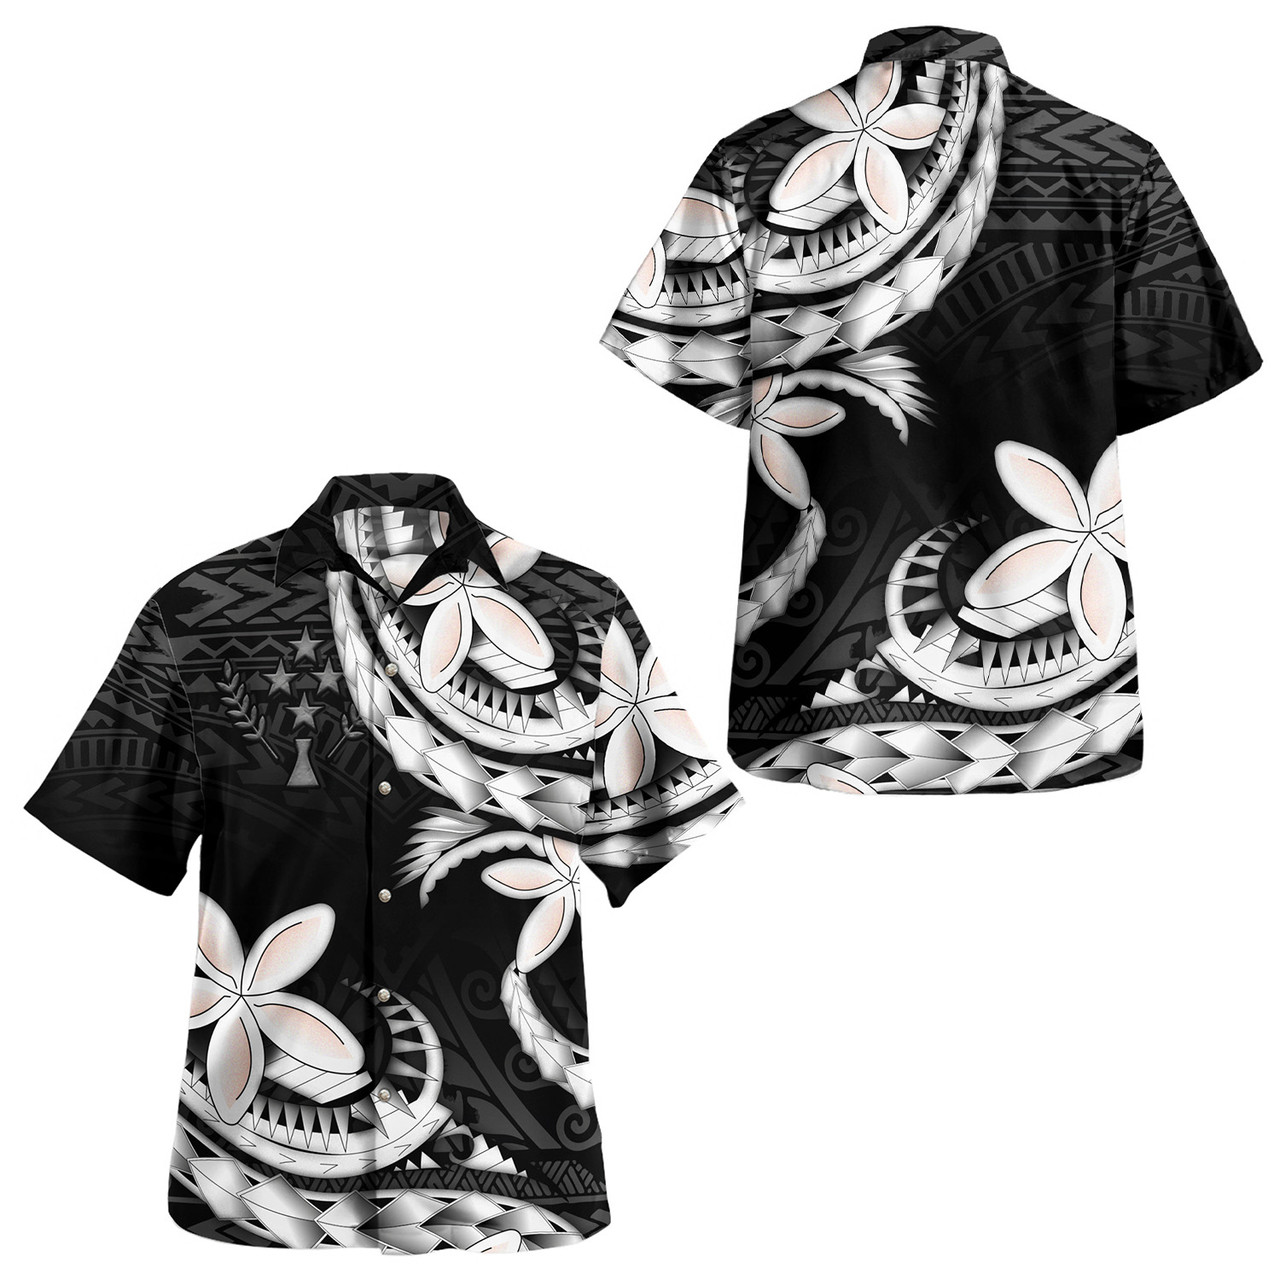 Kosrae Combo Short Sleeve Dress And Shirt Polynesian Patterns Plumeria Flowers Special Style